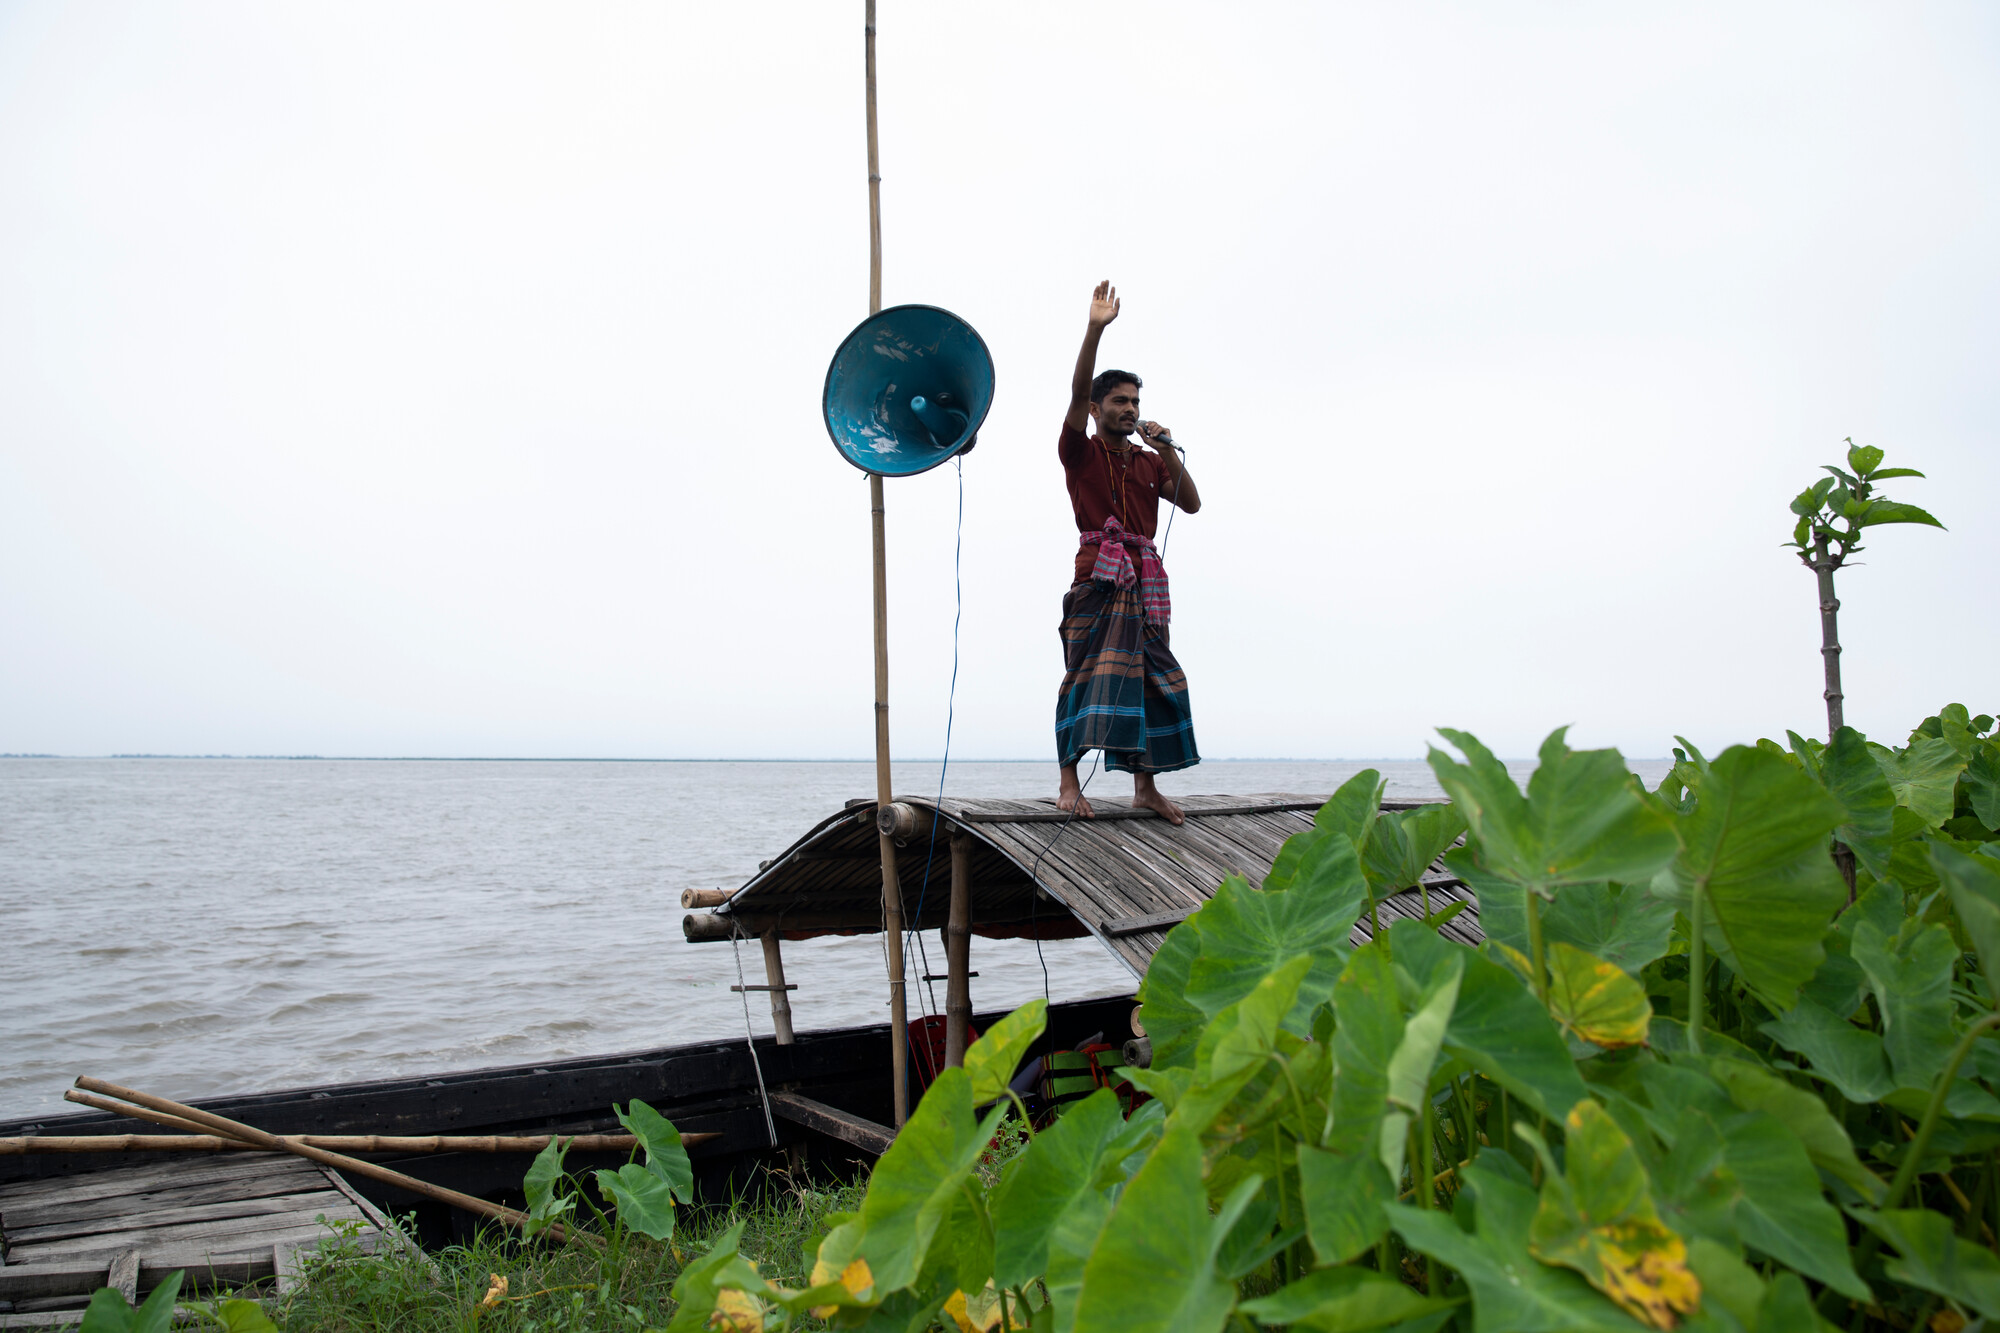 【Newsletter topic】Floods hit Bangladesh, and CARE's disaster prevention and mitigation measures